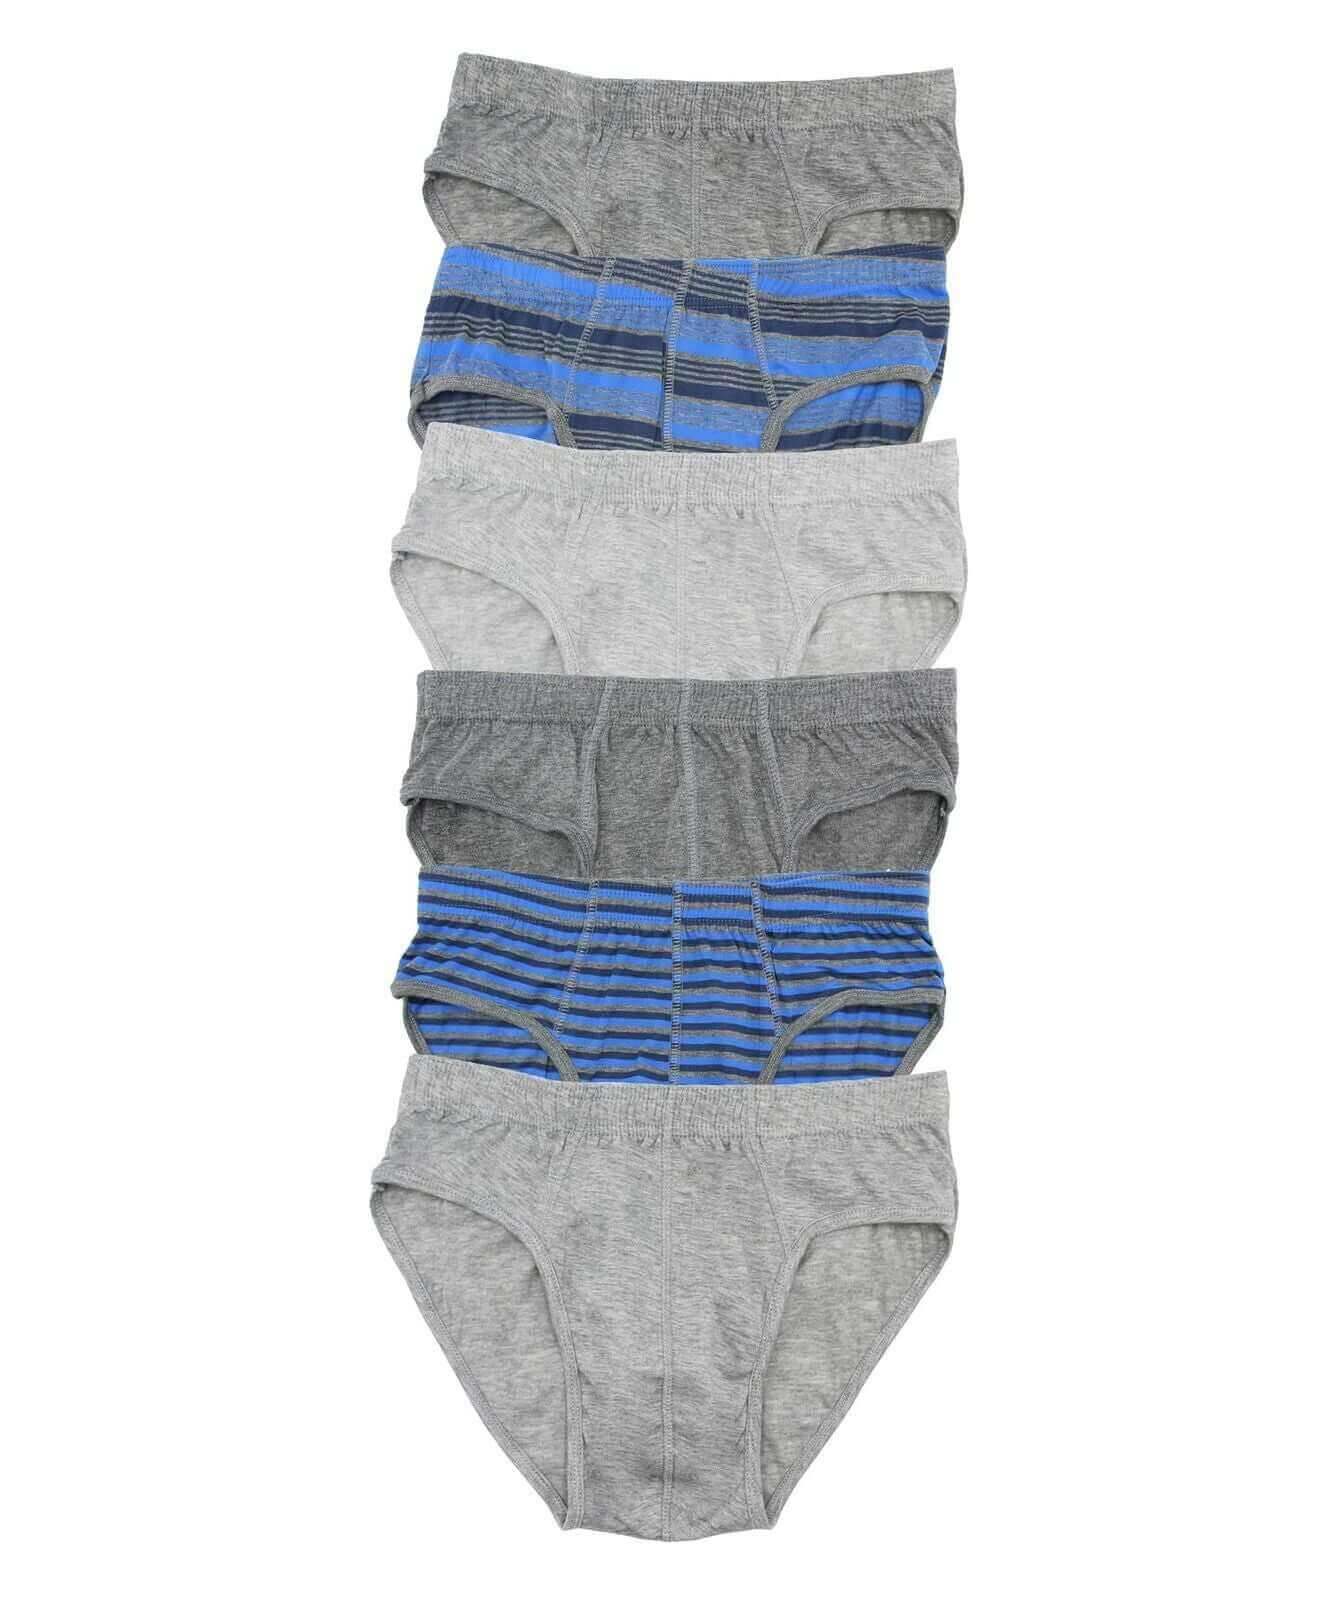 Men's Striped Briefs Cotton Underwear Pant, 6 Pairs. Buy now for £10.00. A Underwear by Sock Stack. assorted, athletics, blue, bottom, boys, briefs, grey, kids, large, medium, mens, navy, pants, plain, small, sports, striped, underwear, x large, xx large,